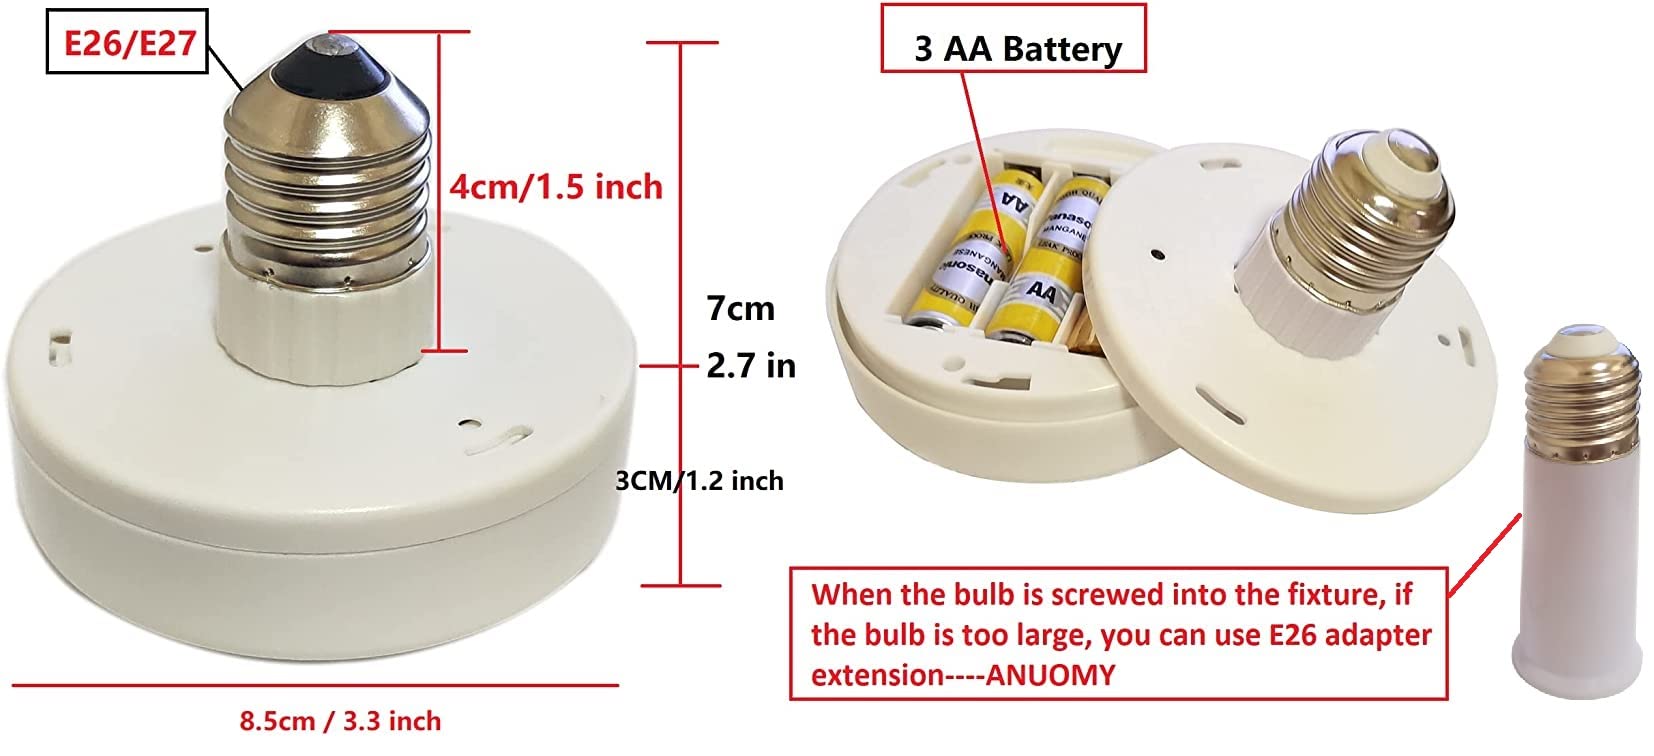 2 Pack Battery Operated Light Bulbs for Lamps with Remote,Replacement AA Battery Light Bulbs,Battery Powered LED Puck Lights With E26 Screw in for Non Electric Wall Sconce and Pendant light Fixture